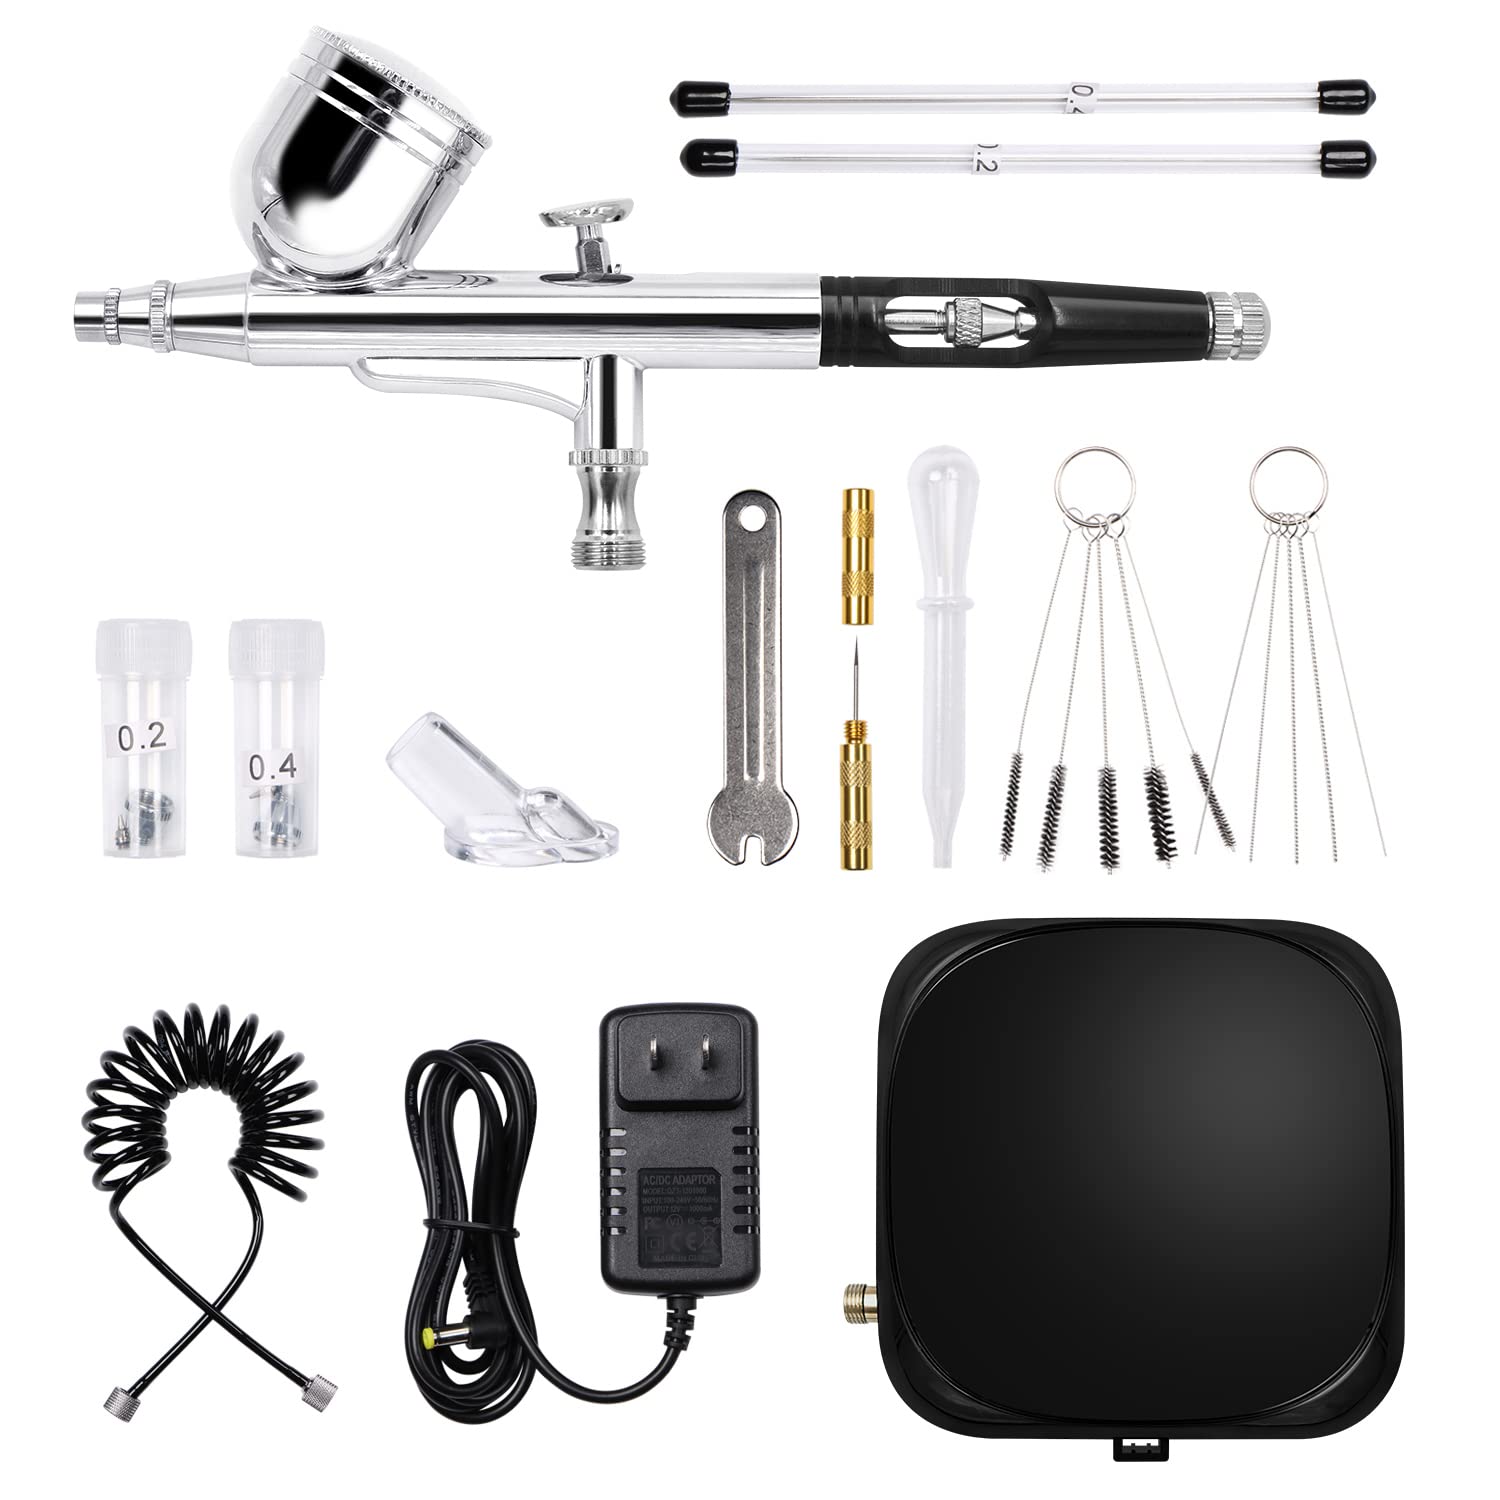 Adjustable Airbrush Compressor Kit - 3 PSI Settings up to 30 PSI, Dual  Action Airbrush with Multiple Nozzles and Accessories for Painting, Model  Spray, Nail, Makeup, Cake Decoration & Tattoo